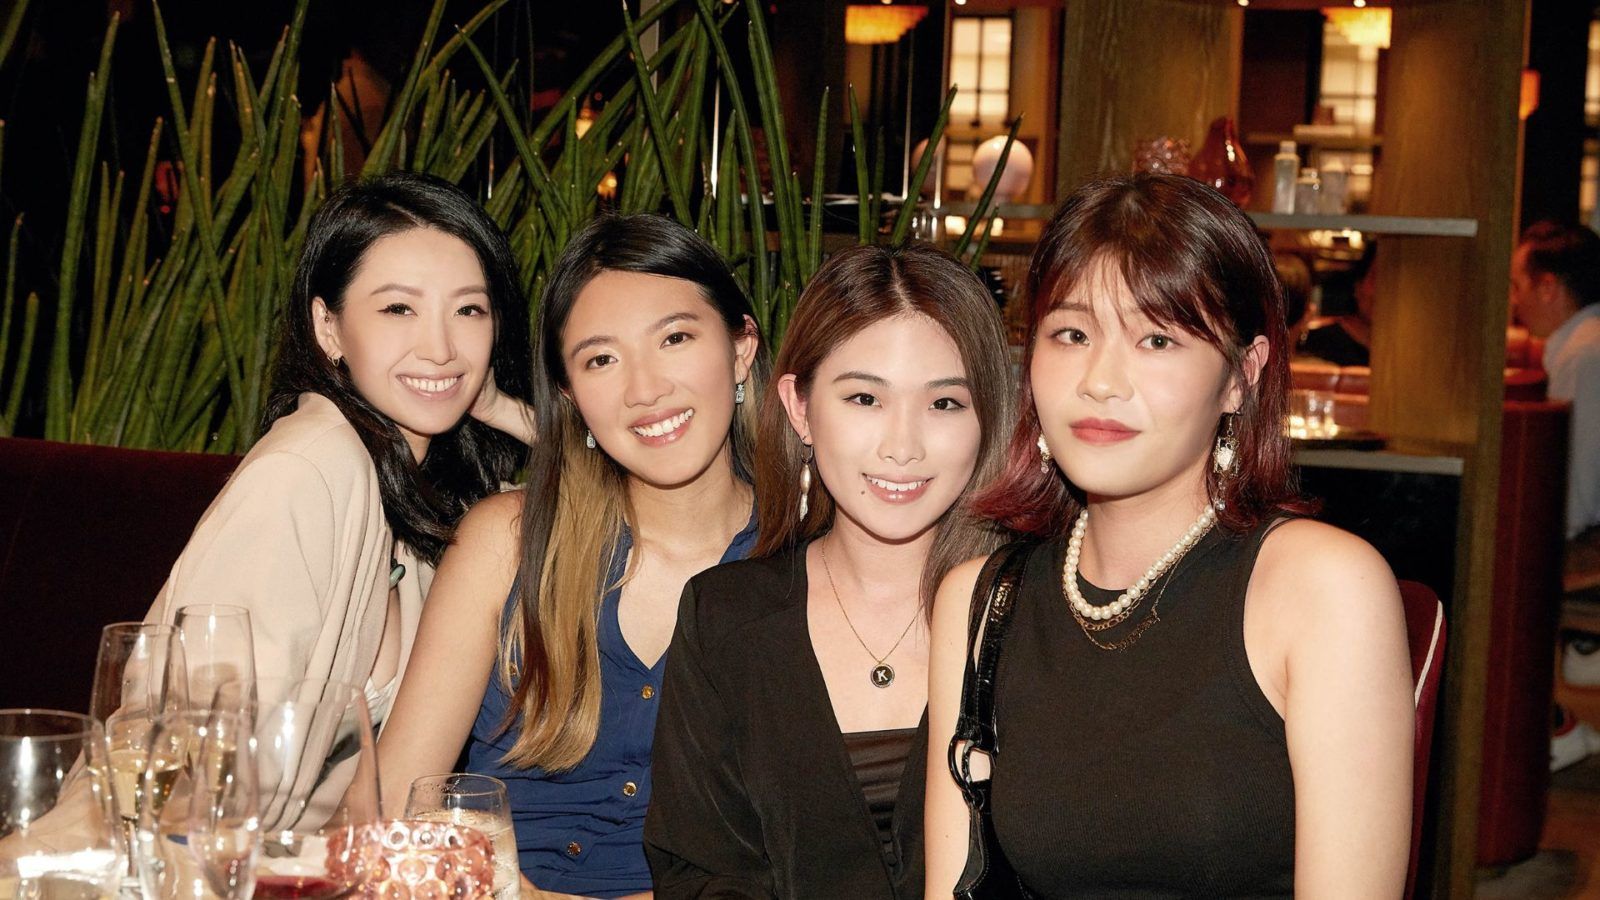 Art Aperitif: Behind the Scenes of the Lifestyle Asia x Prestige x The Hari Party